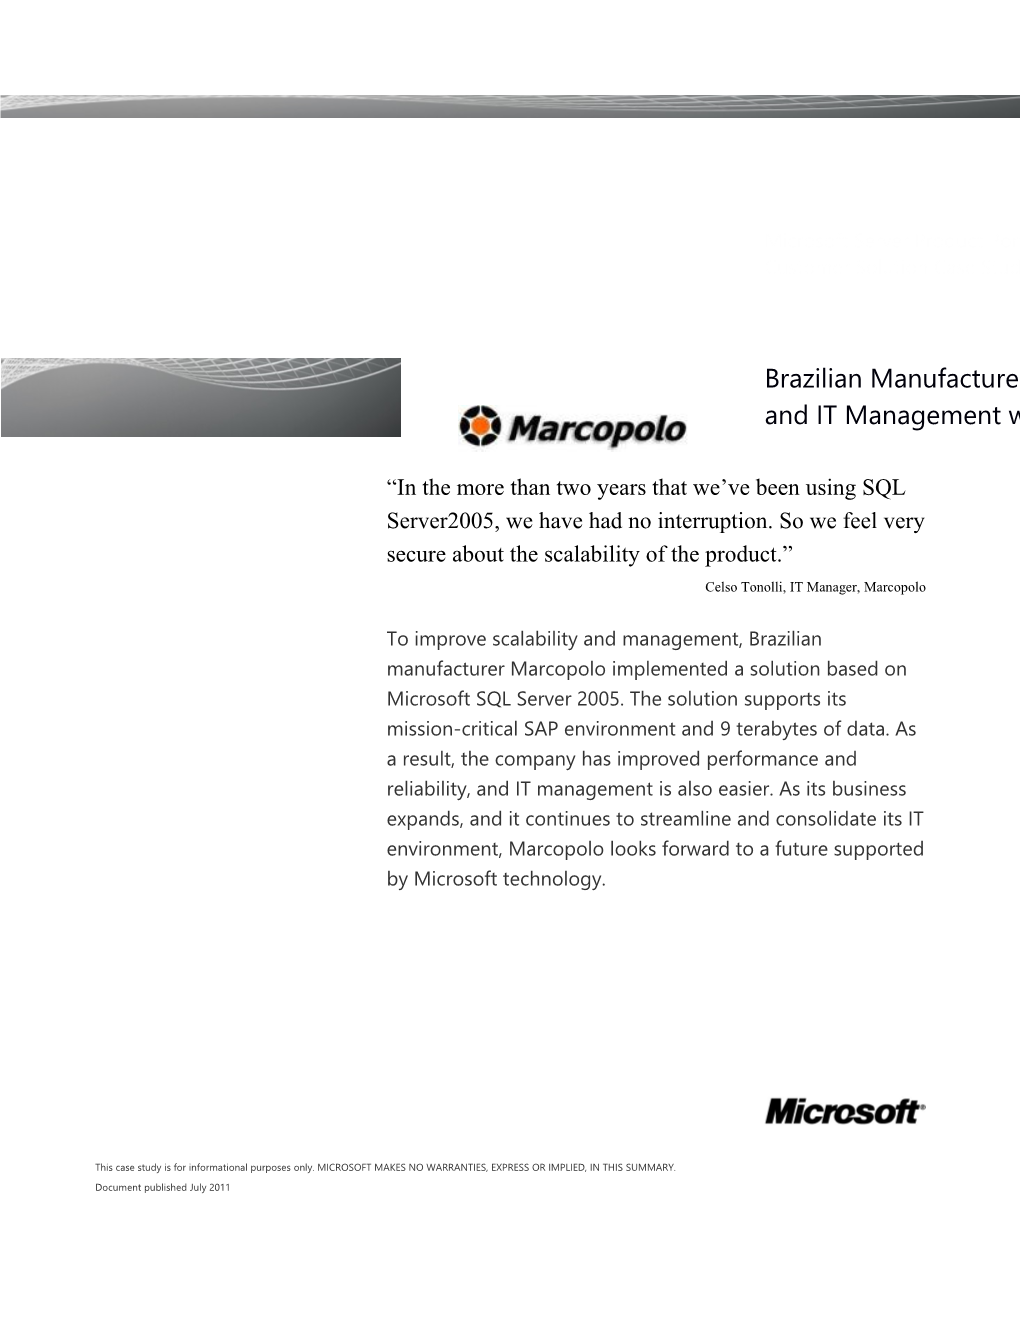 Brazilian Manufacturer Improves Scalability and IT Management with Database Solution